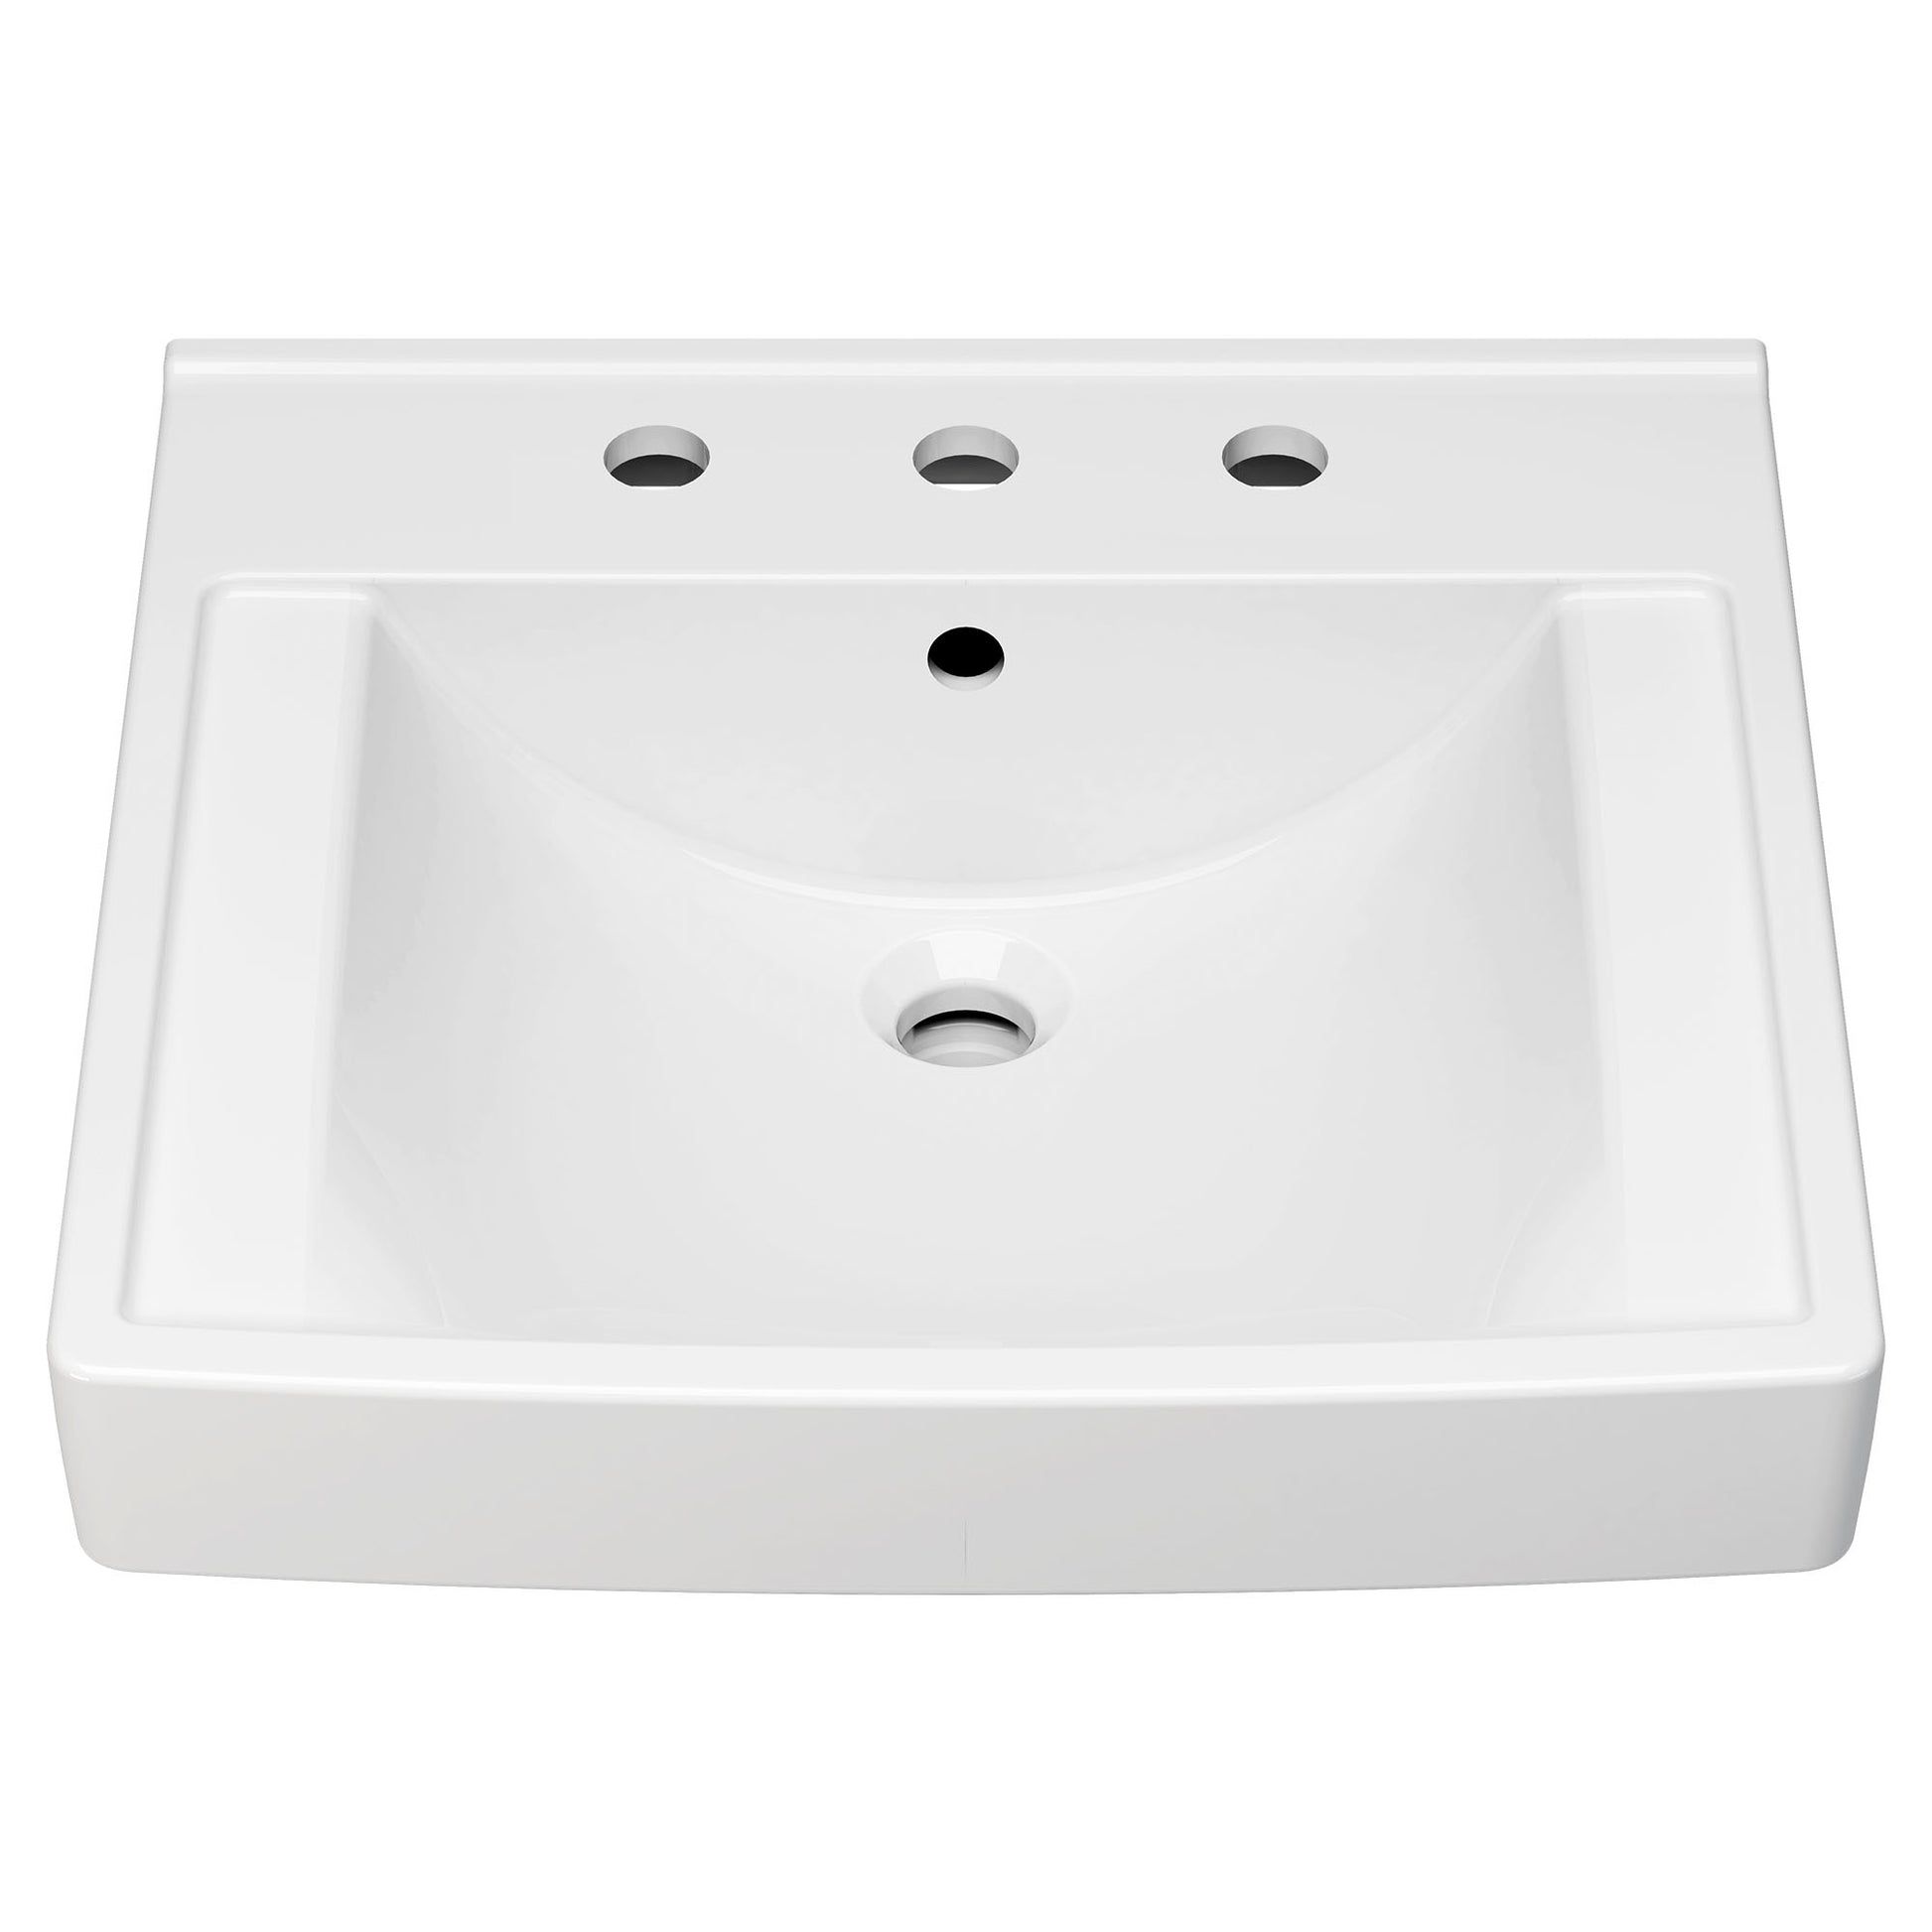 AMERICAN-STANDARD 9134008EC.020, Decorum 21 x 20-1/4-Inch (533 x 514 mm) Wall-Hung EverClean Sink With 8-Inch Widespread in White